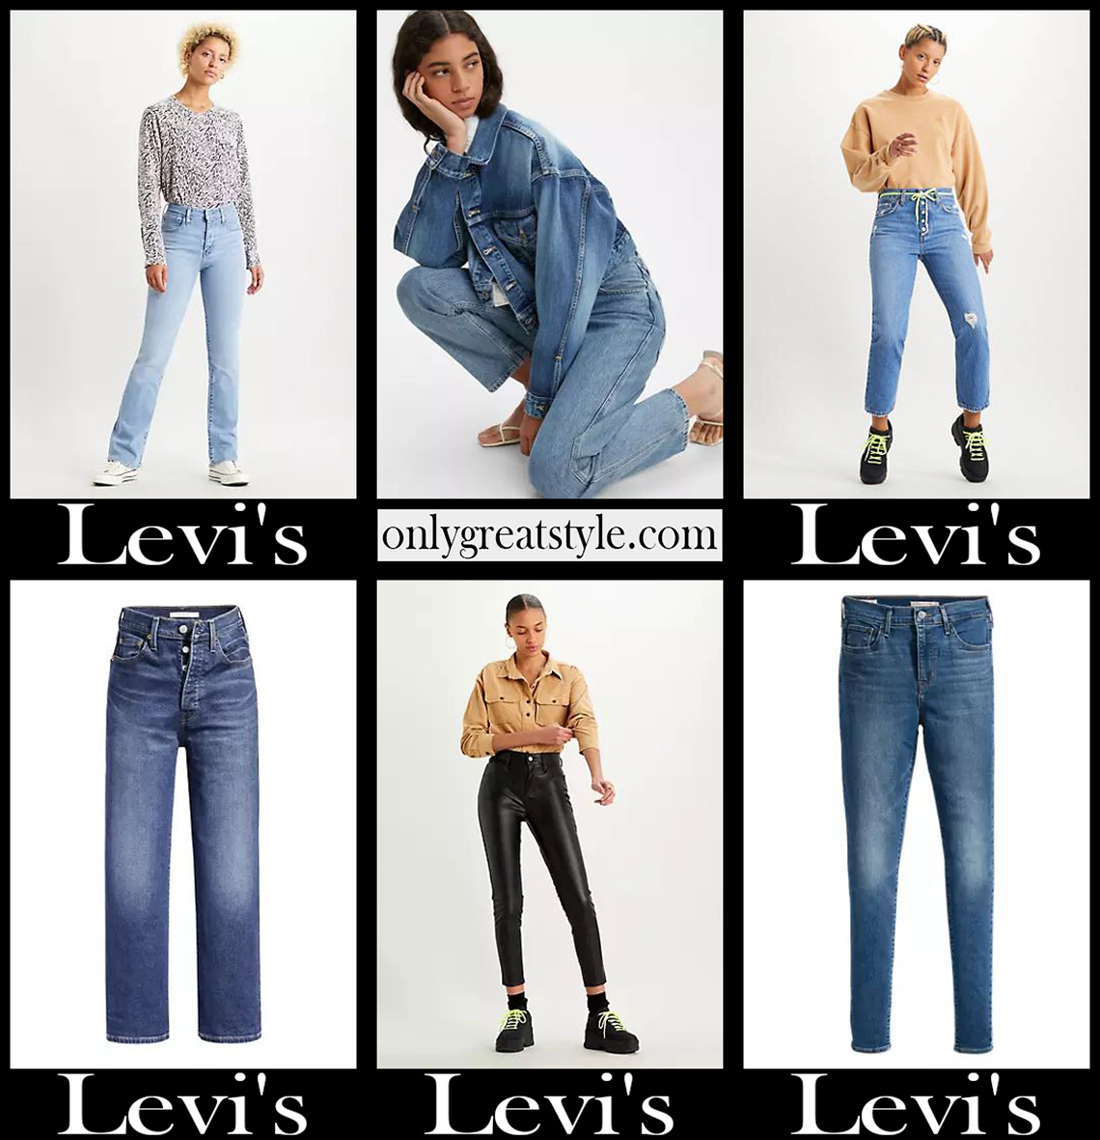 levi new women's collection